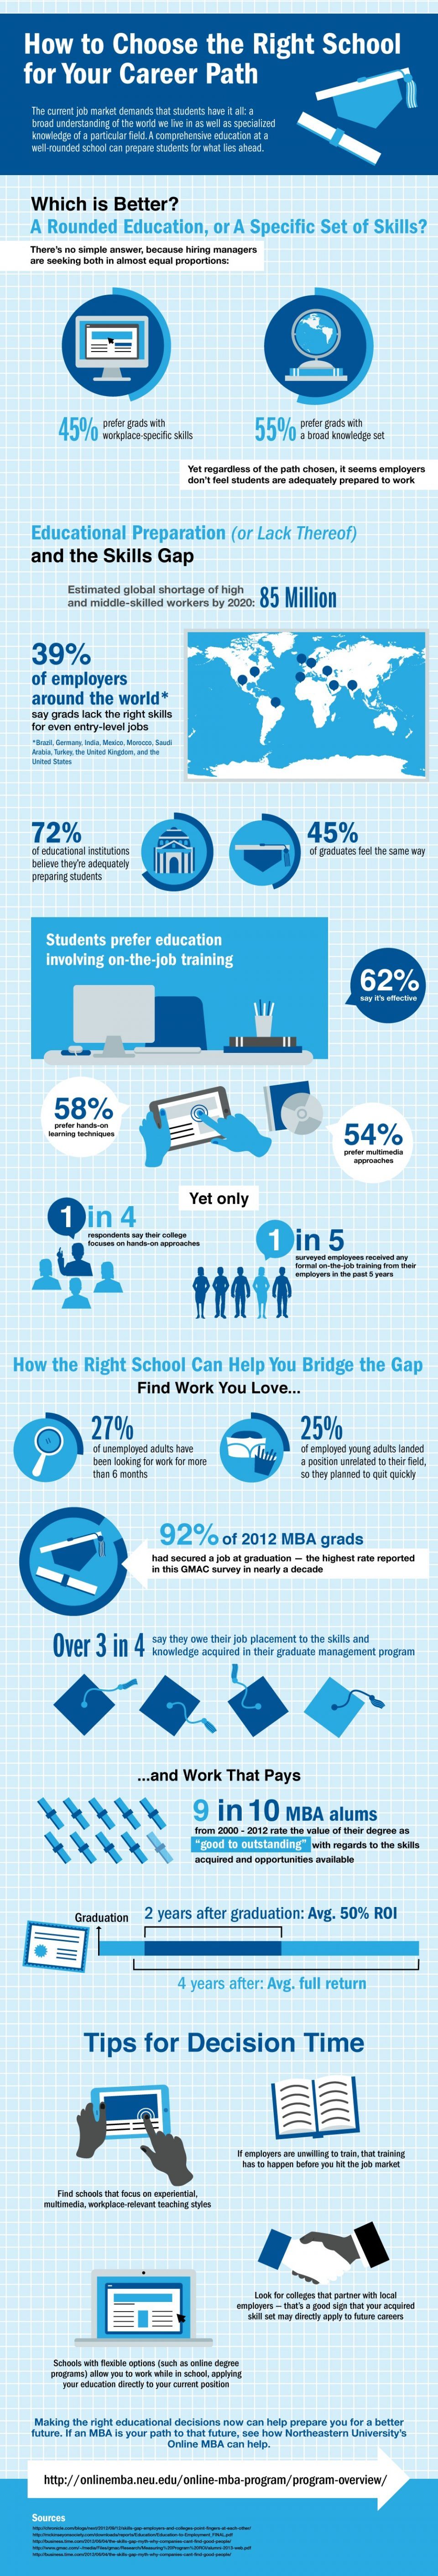 Choosing the Right School for Your Career Path Infographic